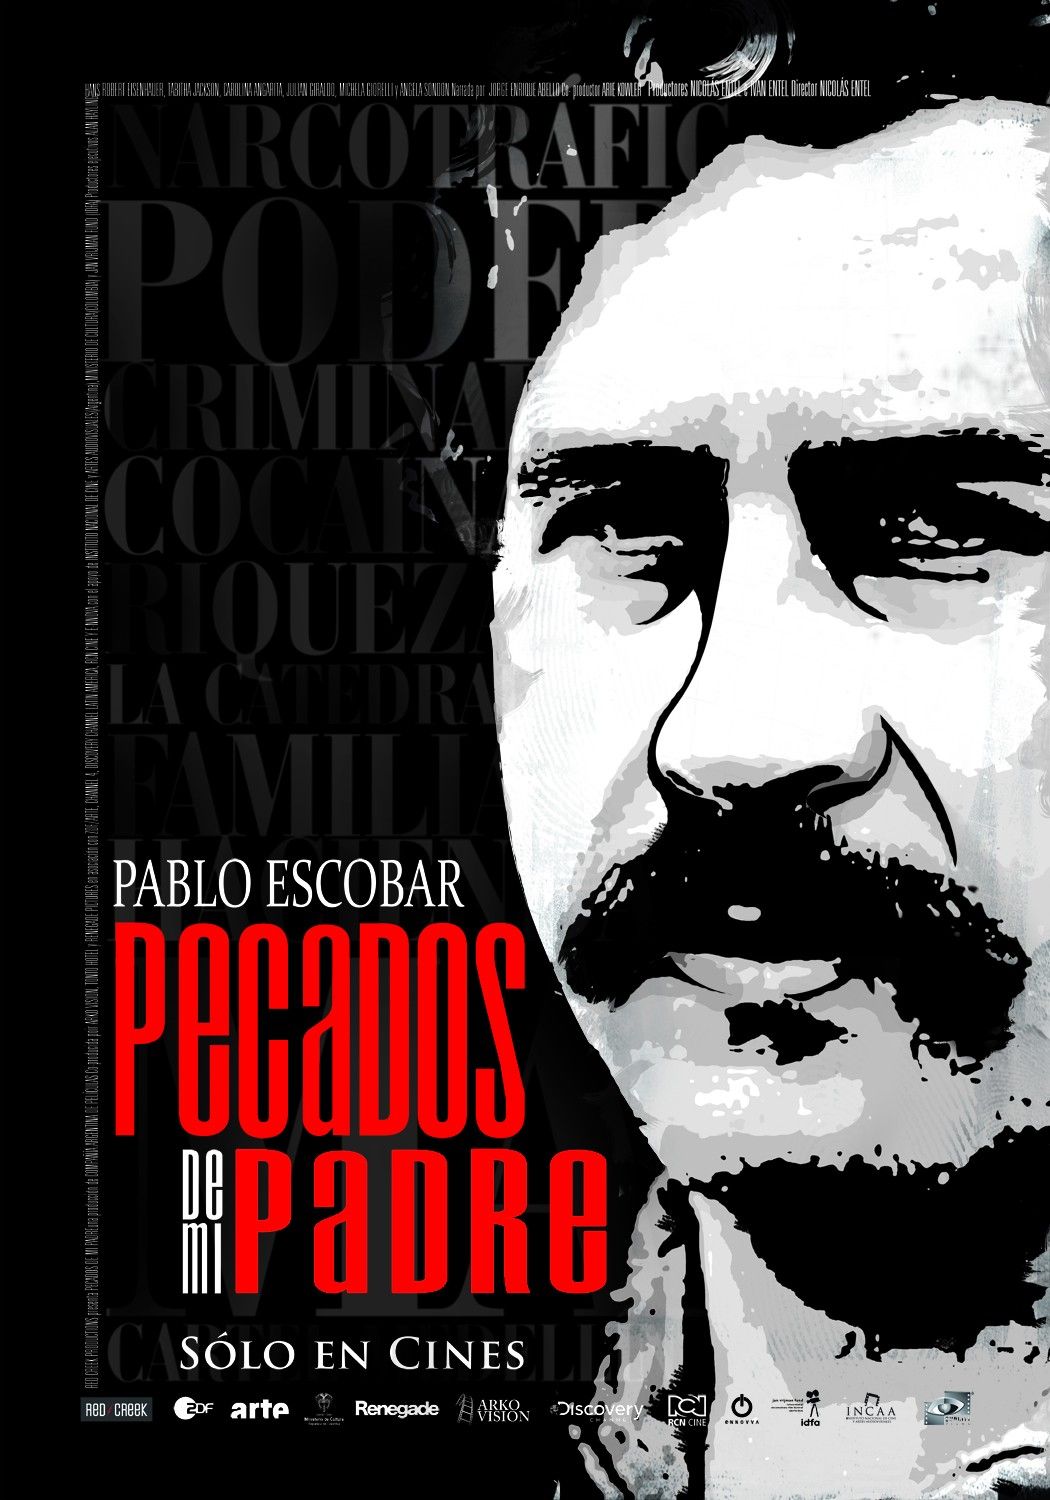 Extra Large Movie Poster Image for Pecados de mi padre (#2 of 2)